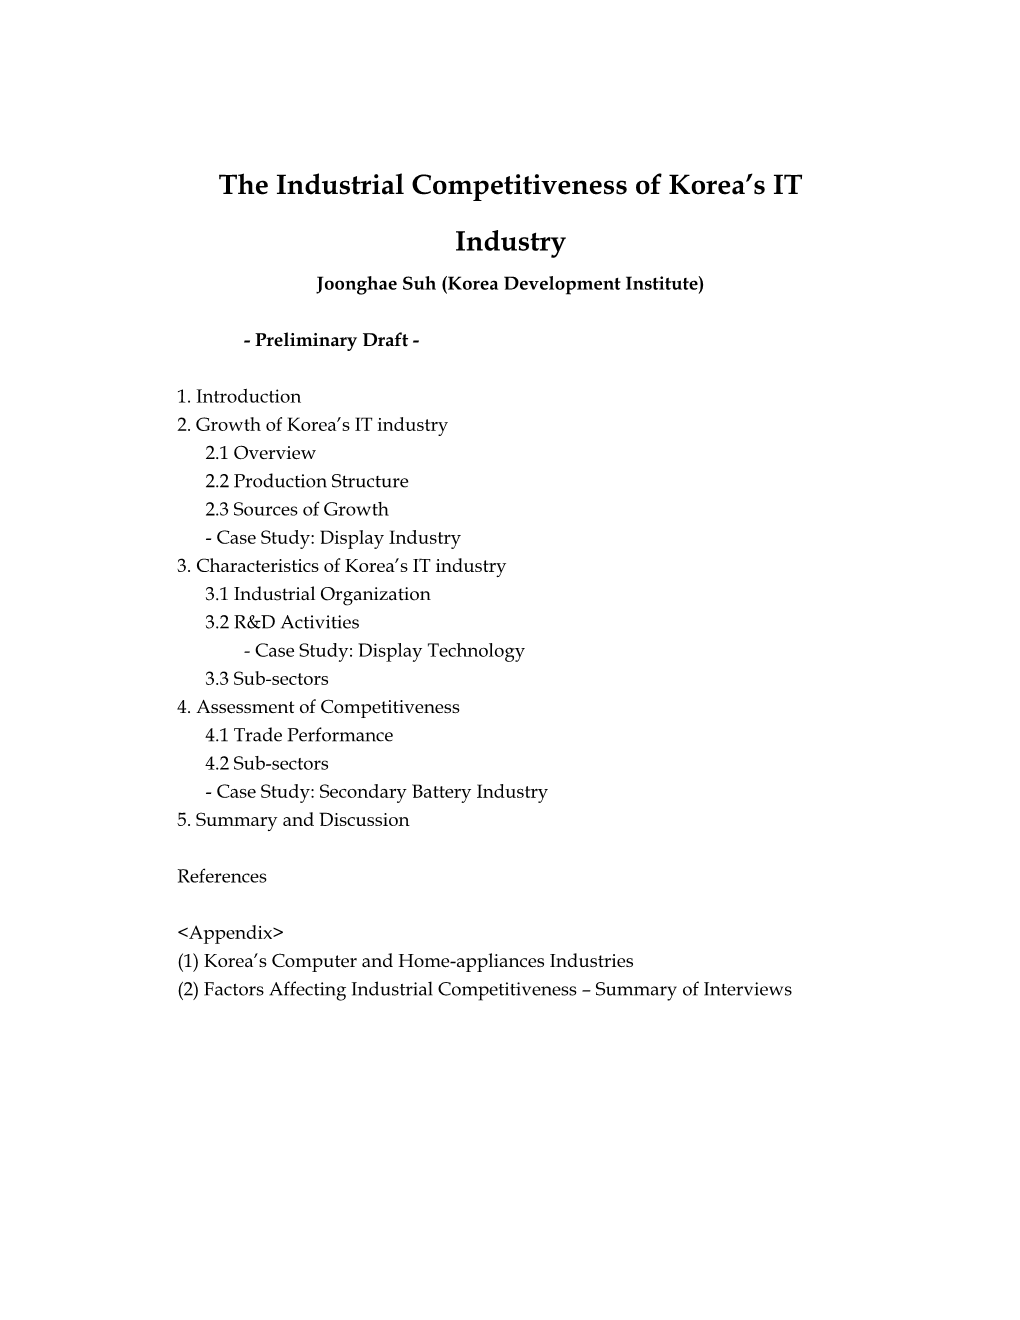 The Industrial Competitiveness of Korea's IT Industry